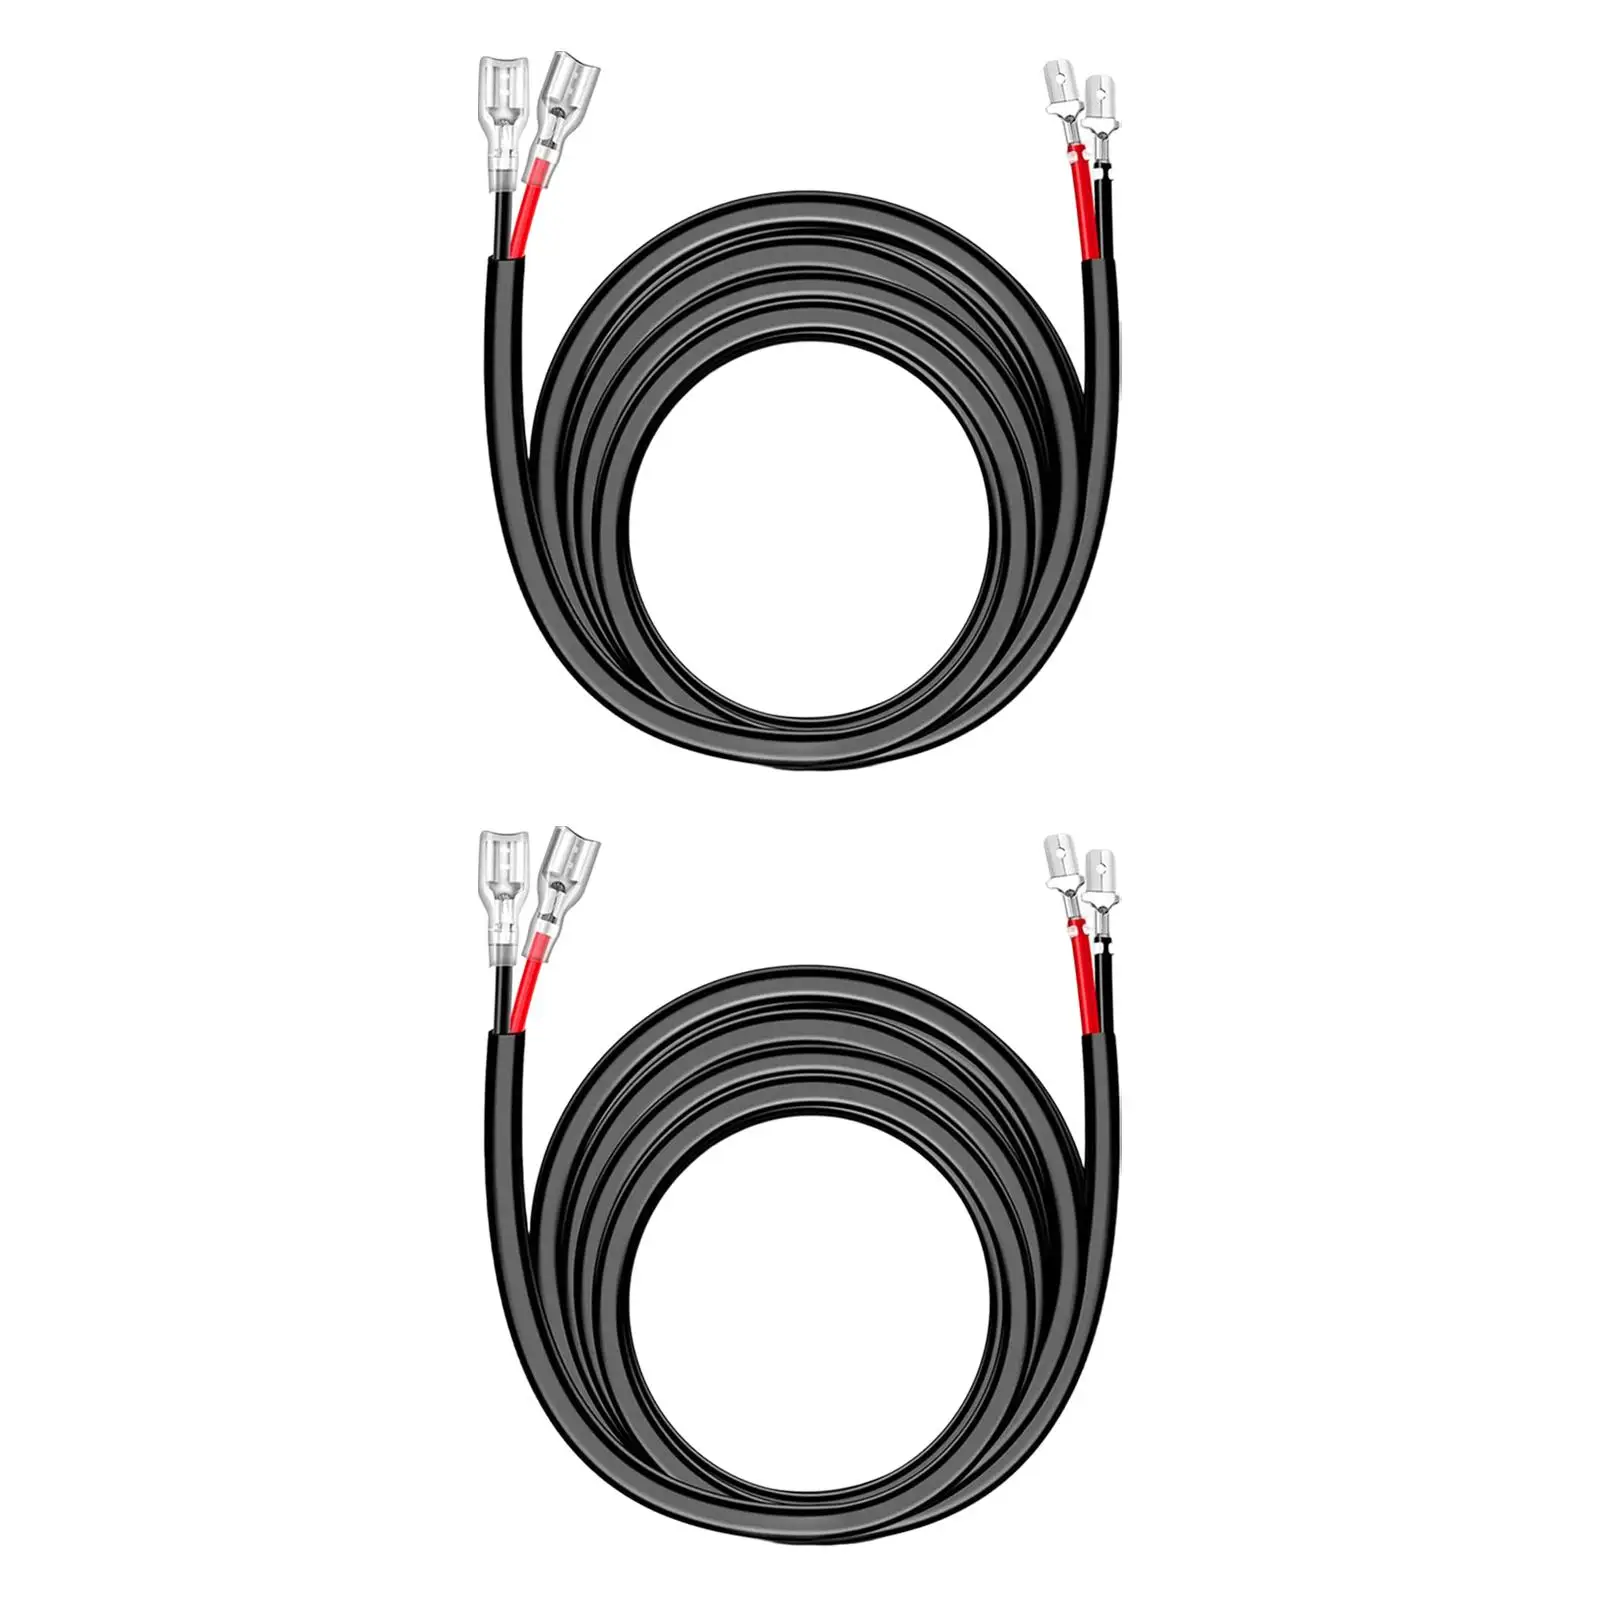 2x 16 Gauge Extension Wiring Harness 300cm High Performance for Work Lamp Yachts Motorcycle Household Appliances Trailer